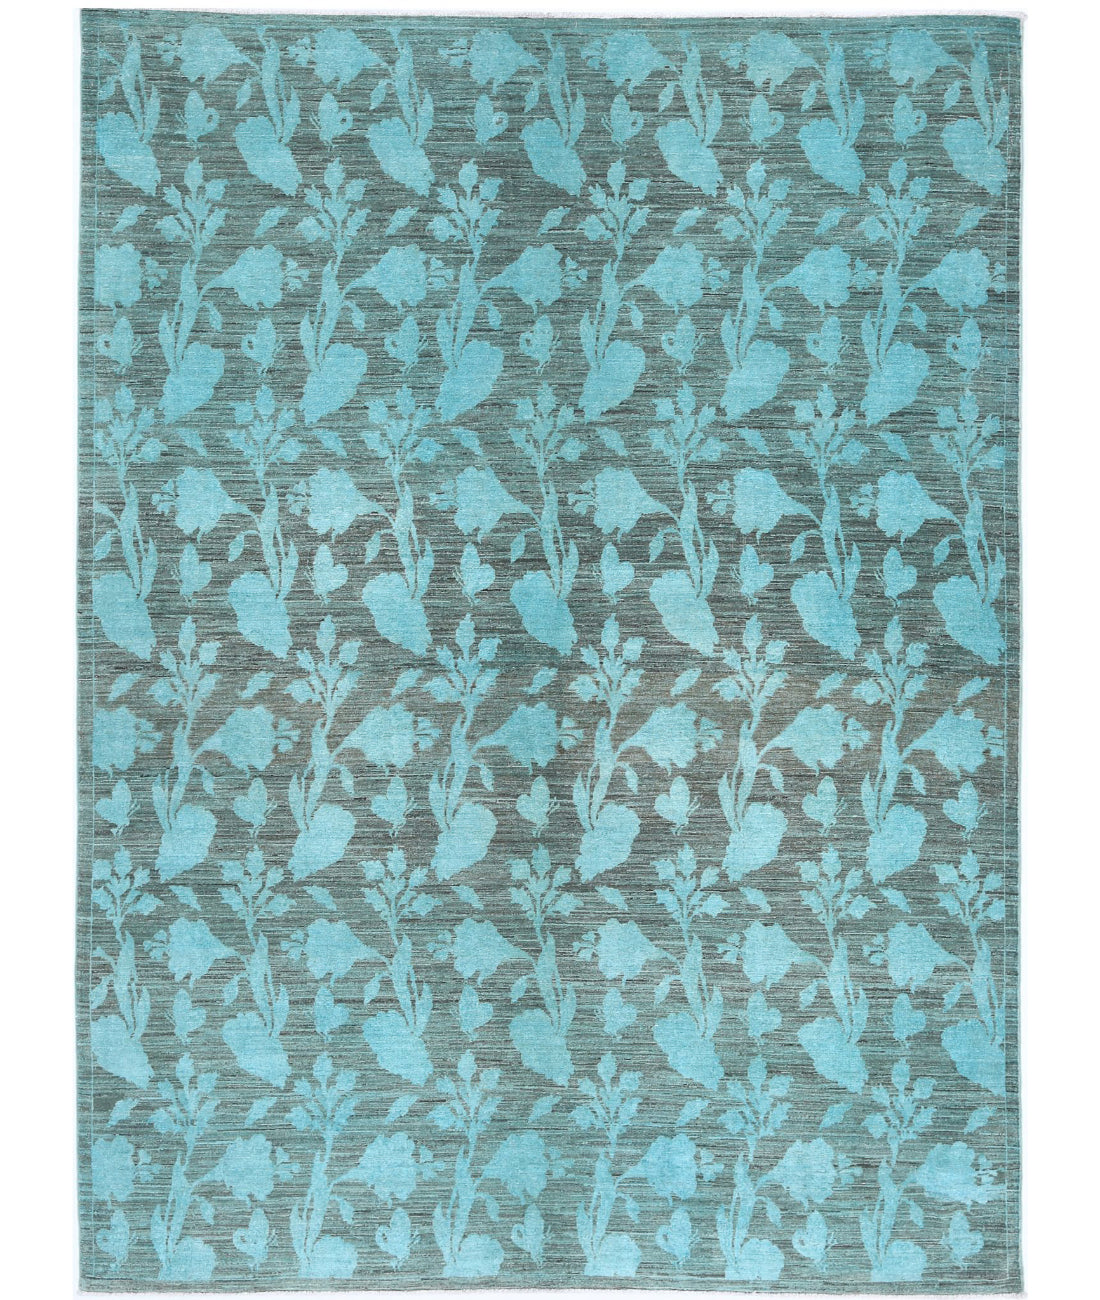 Hand Knotted Overdye Wool Rug - 6'1'' x 8'4'' 6'1'' x 8'4'' (183 X 250) / Green / N/A